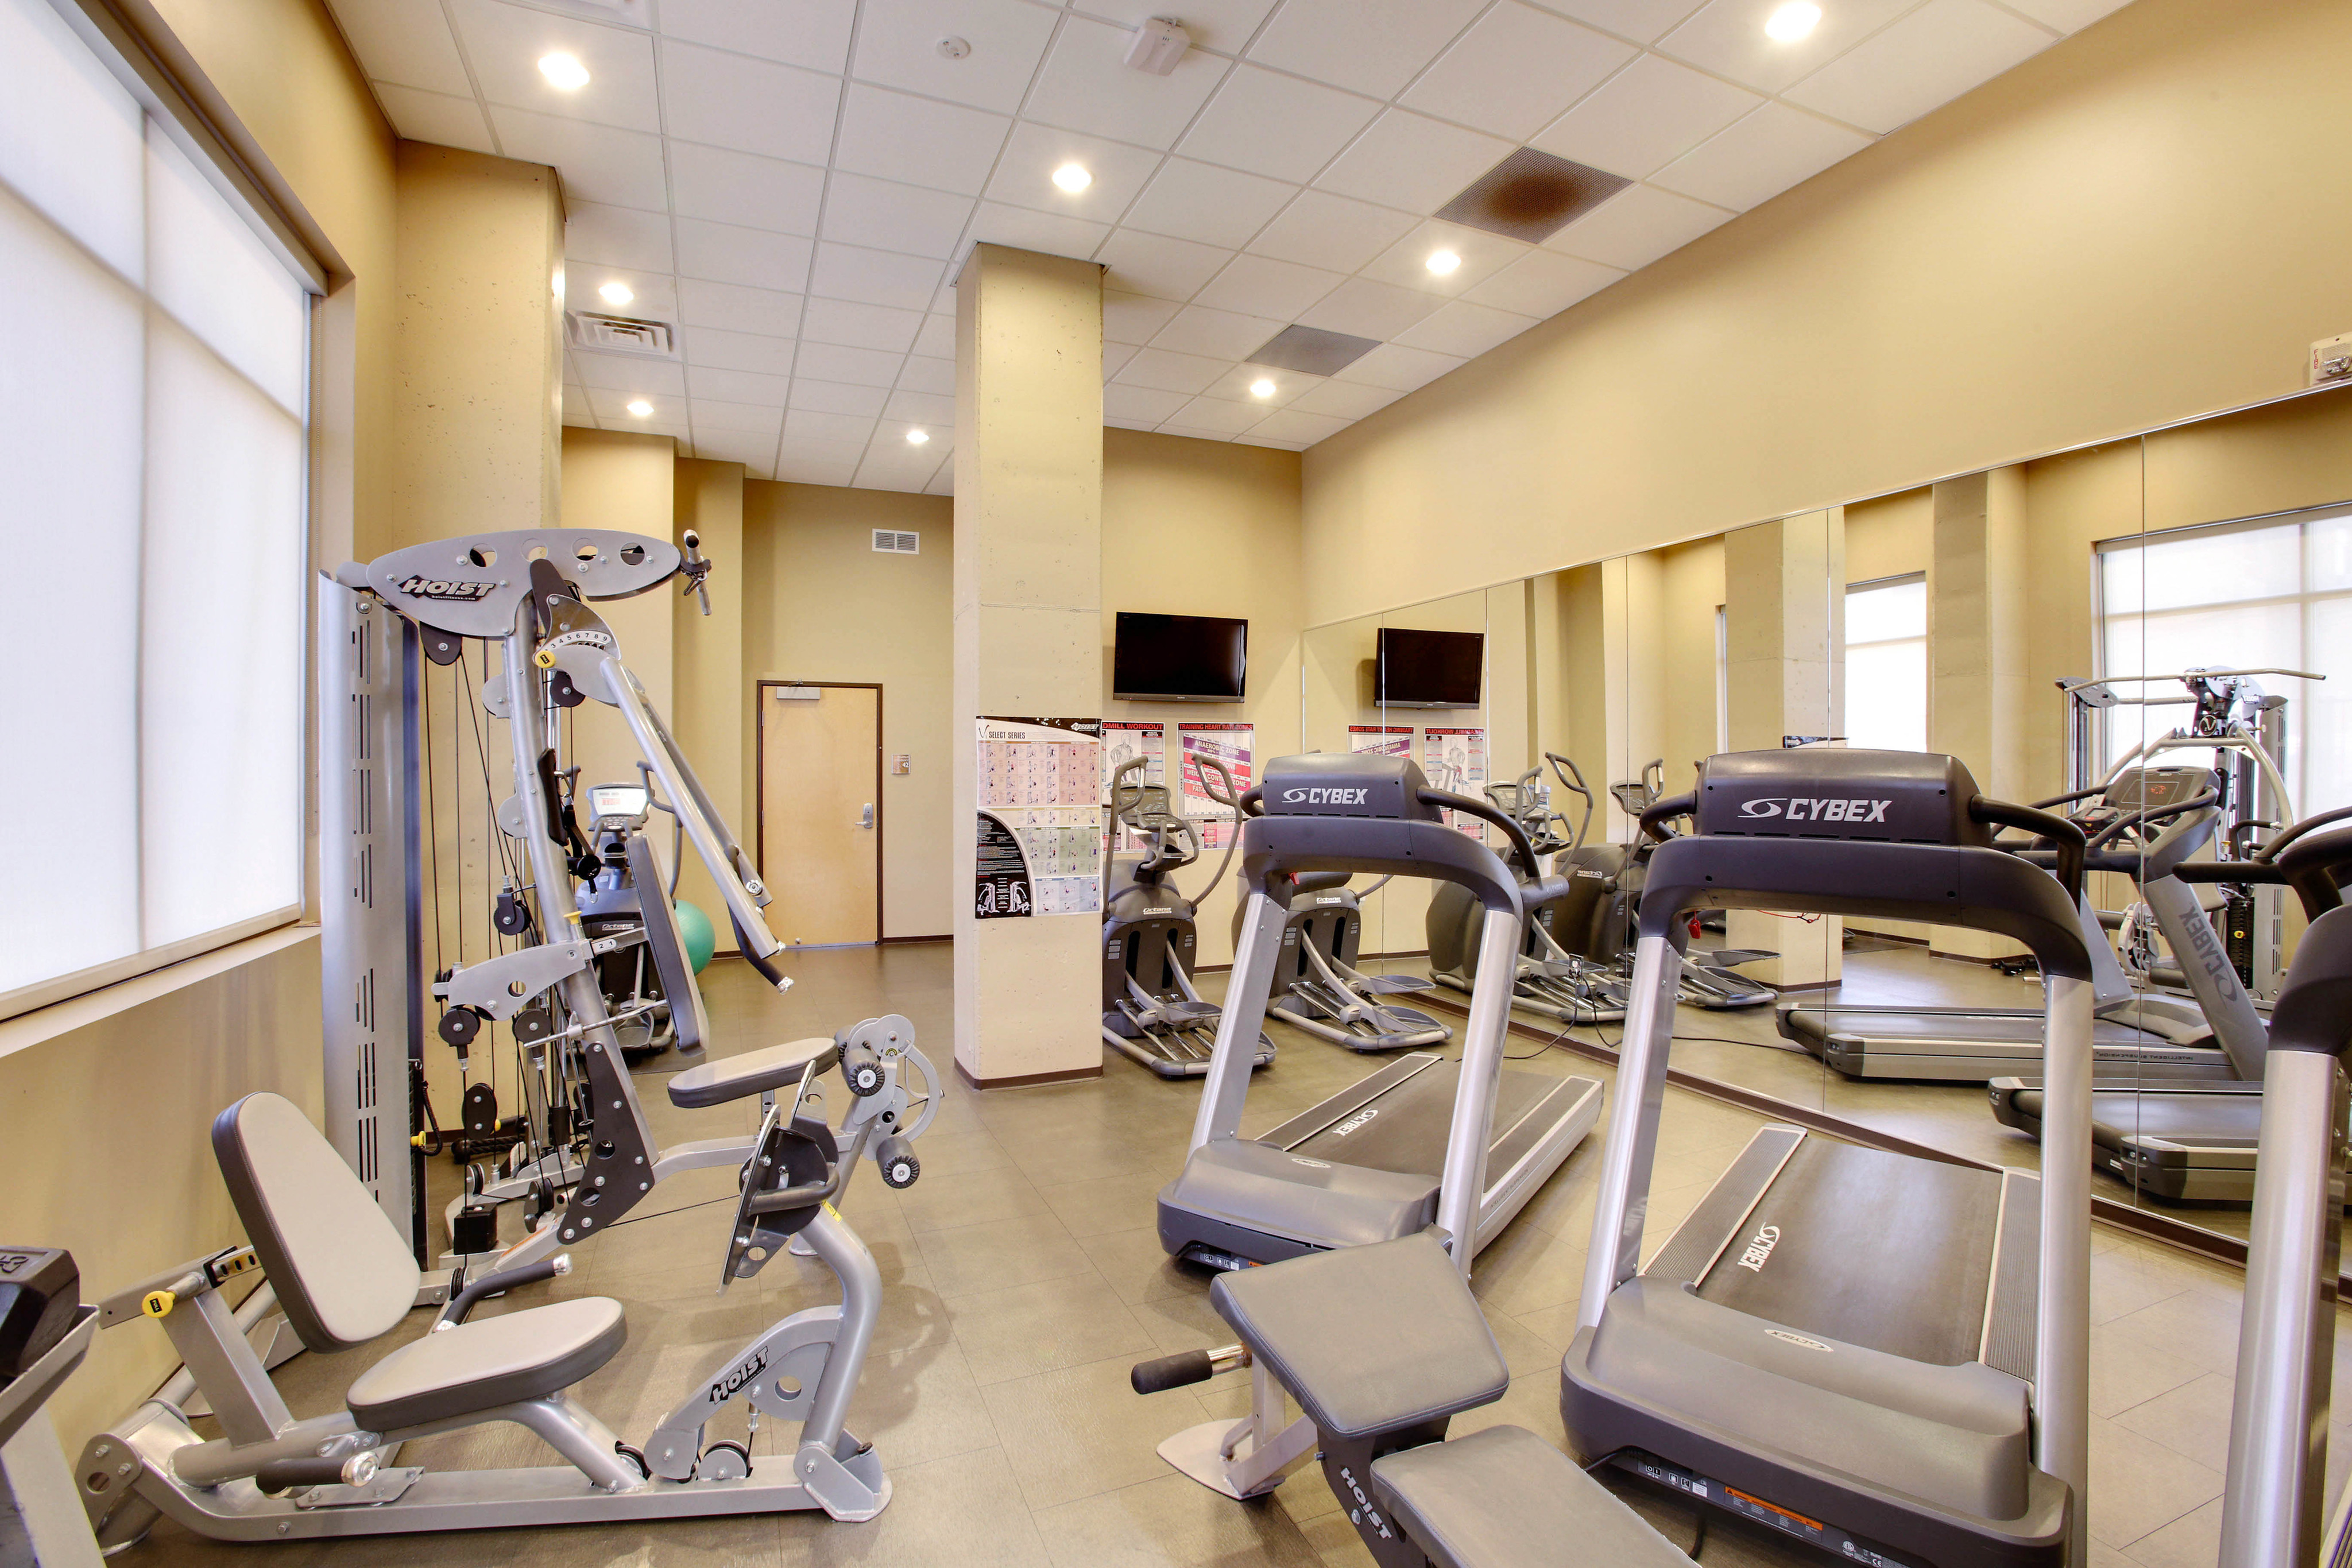 Sydney Hall And Dinkydome Apartments Lifestyle - 24 Hour Fitness Gym